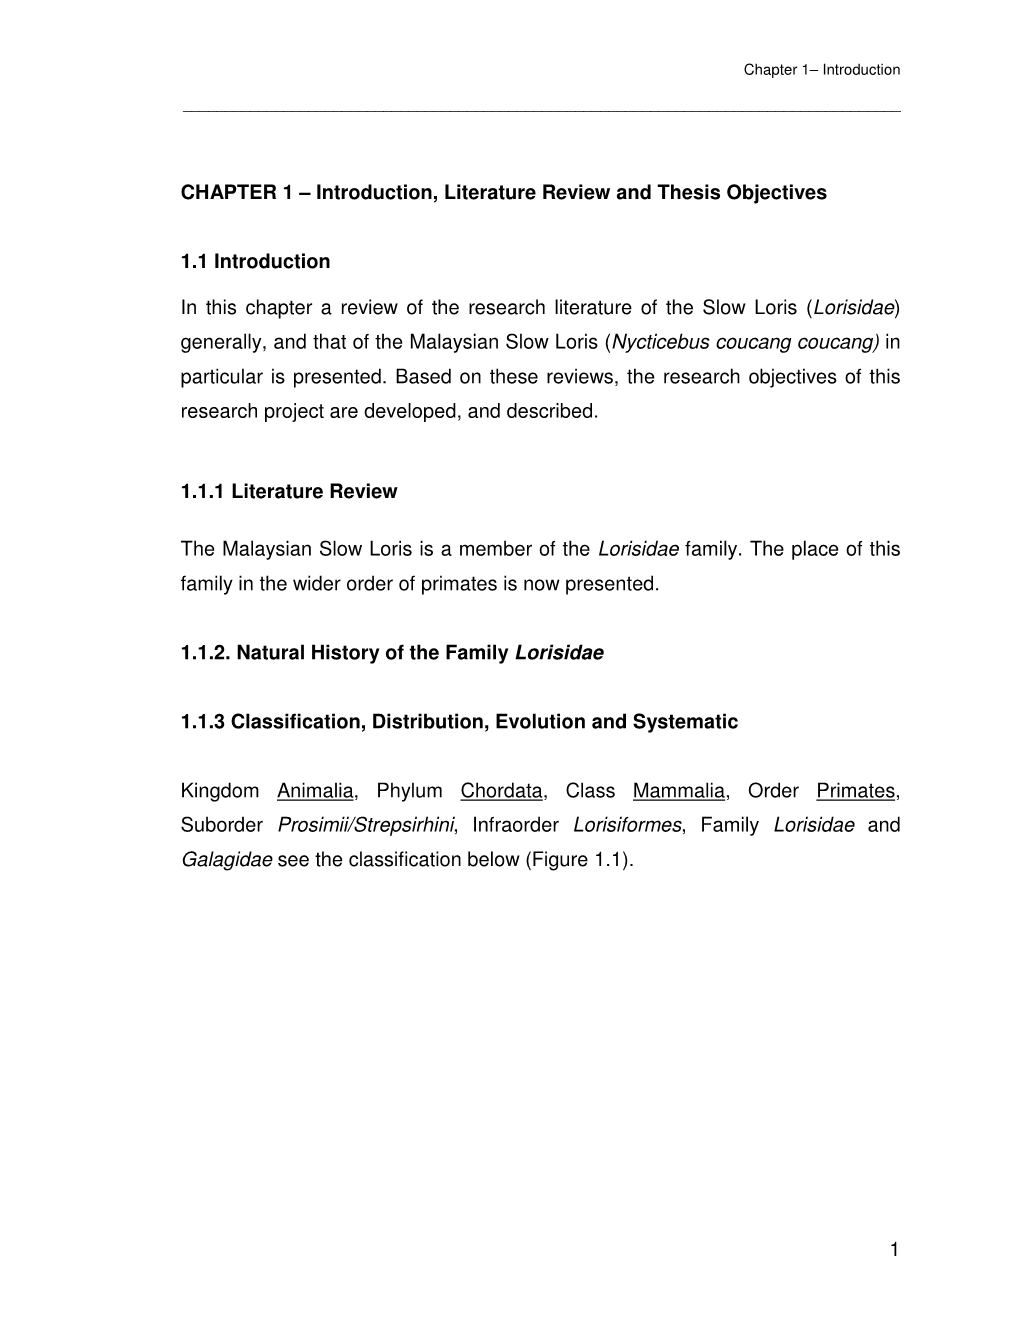 Introduction, Literature Review and Thesis Objectives 1.1 Introduction